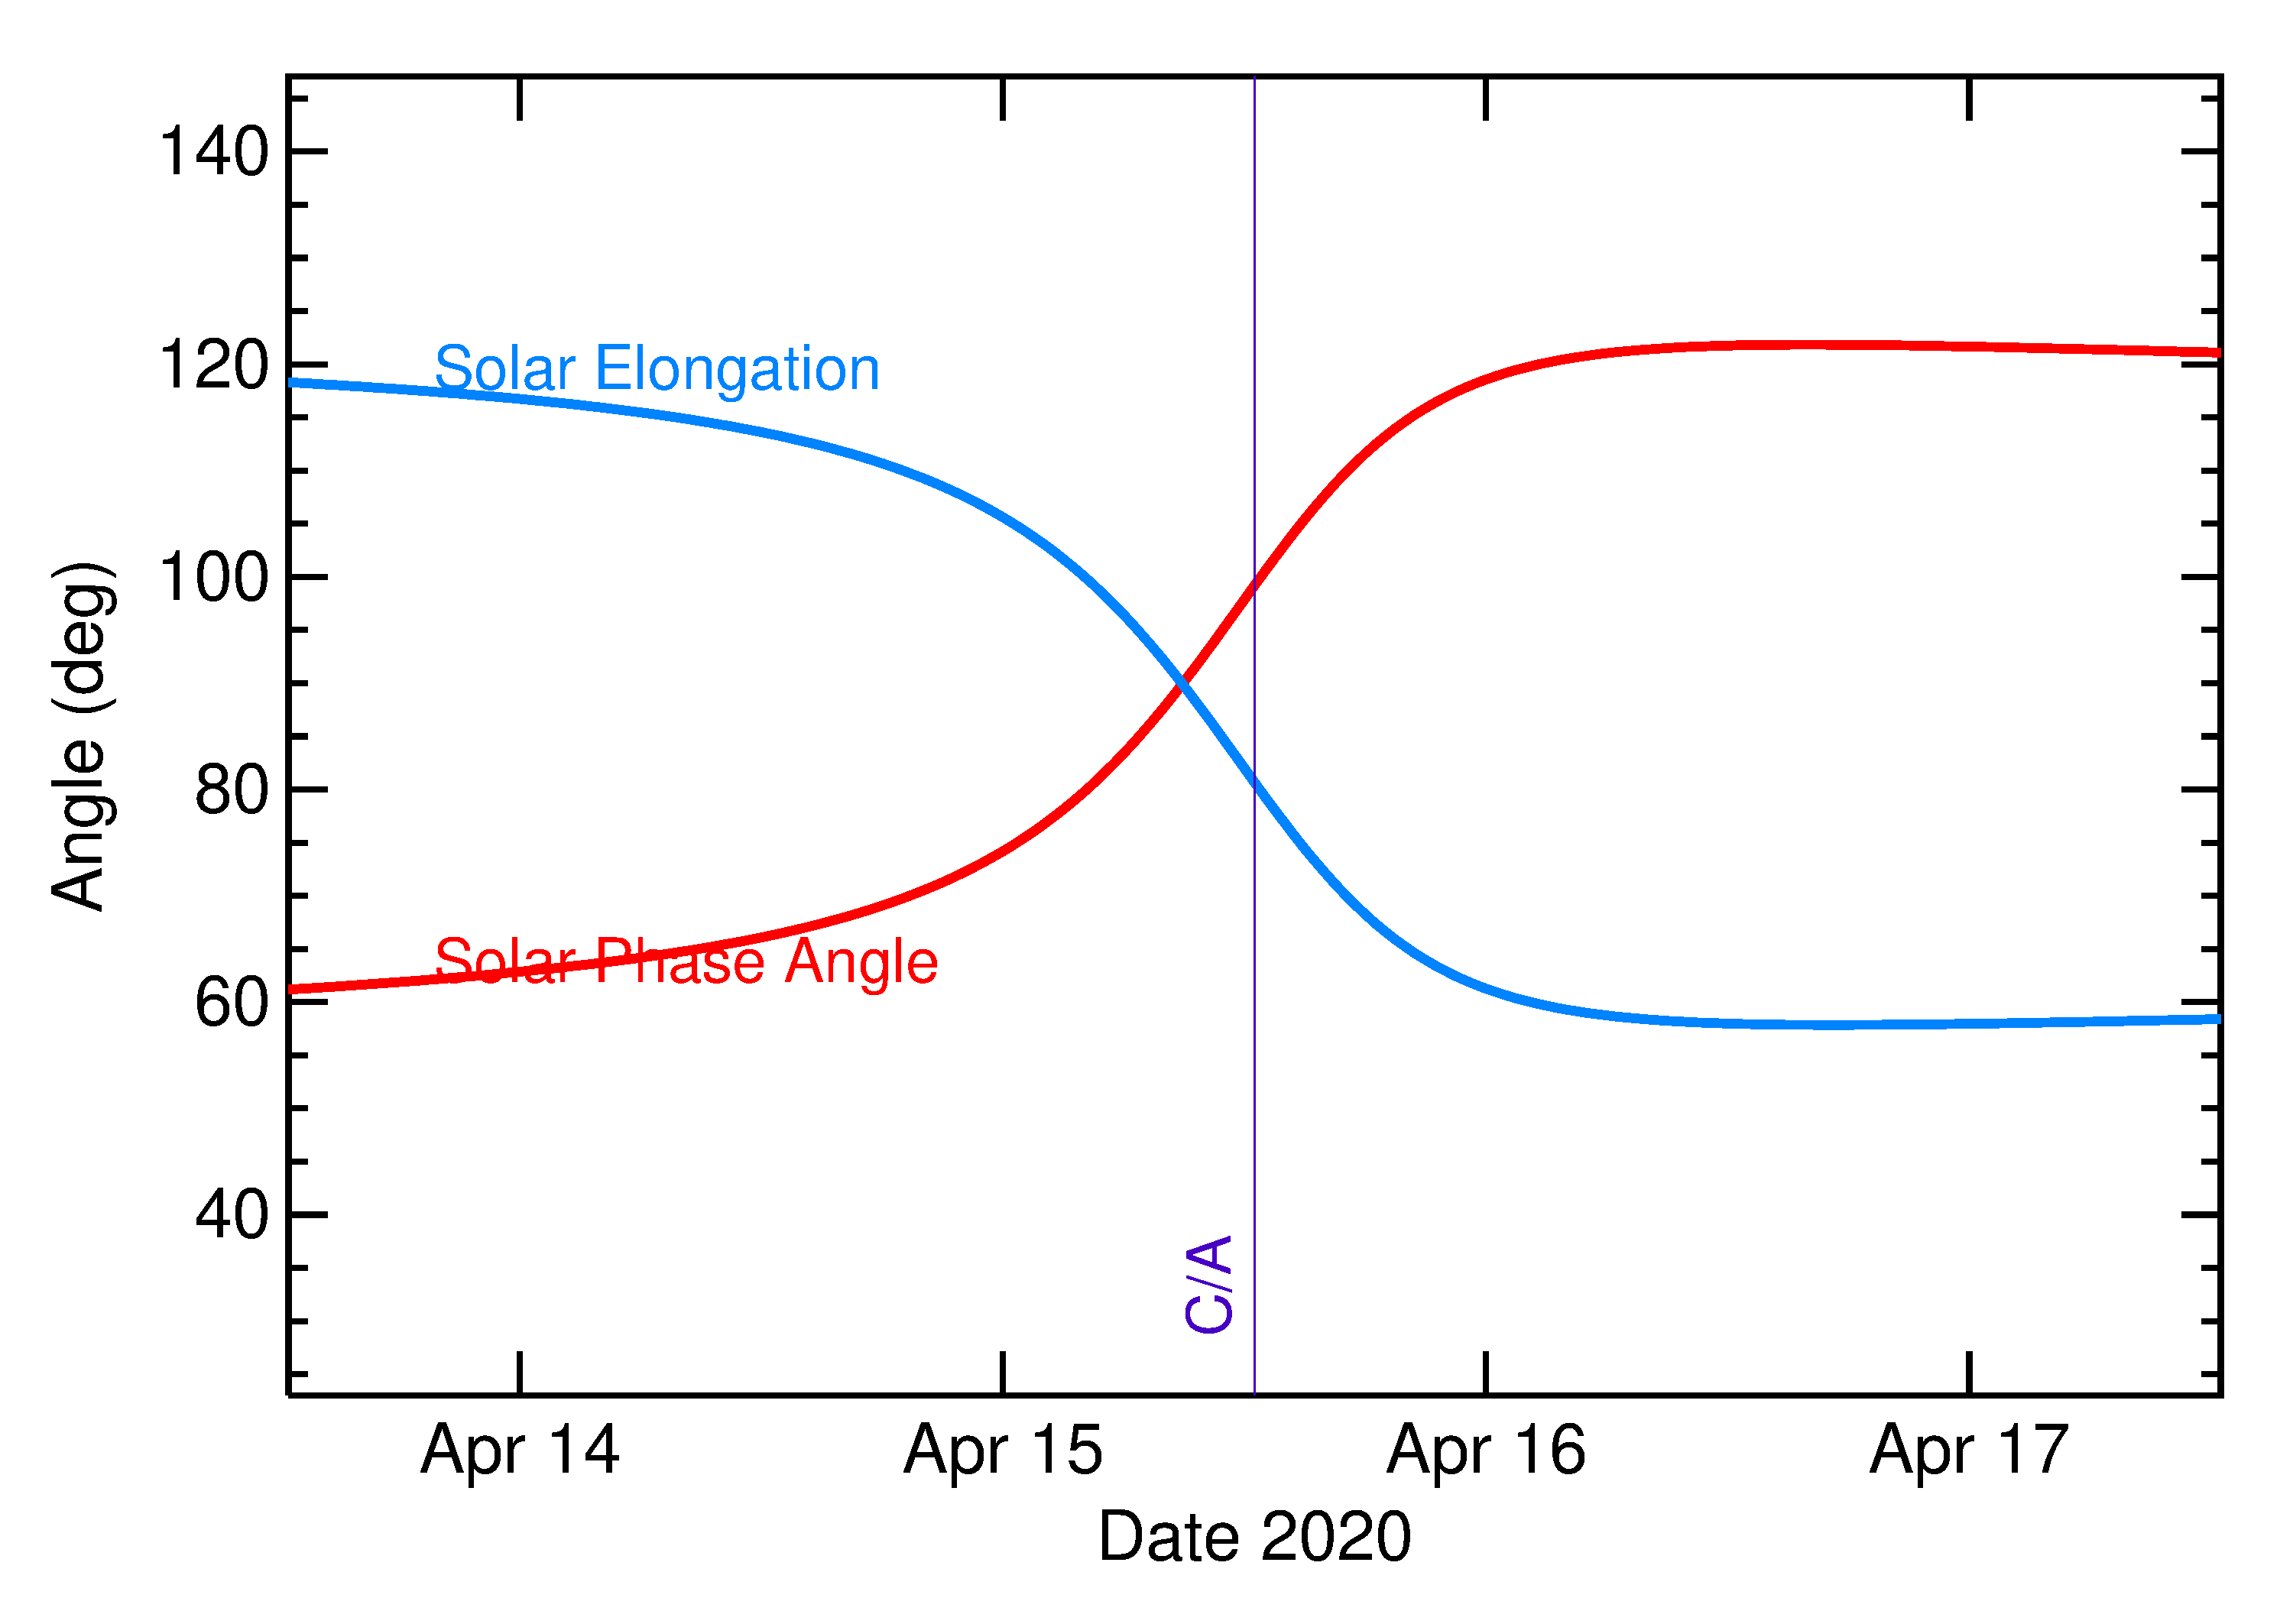 Solar Elongation and Solar Phase Angle of 2020 GH2 in the days around closest approach